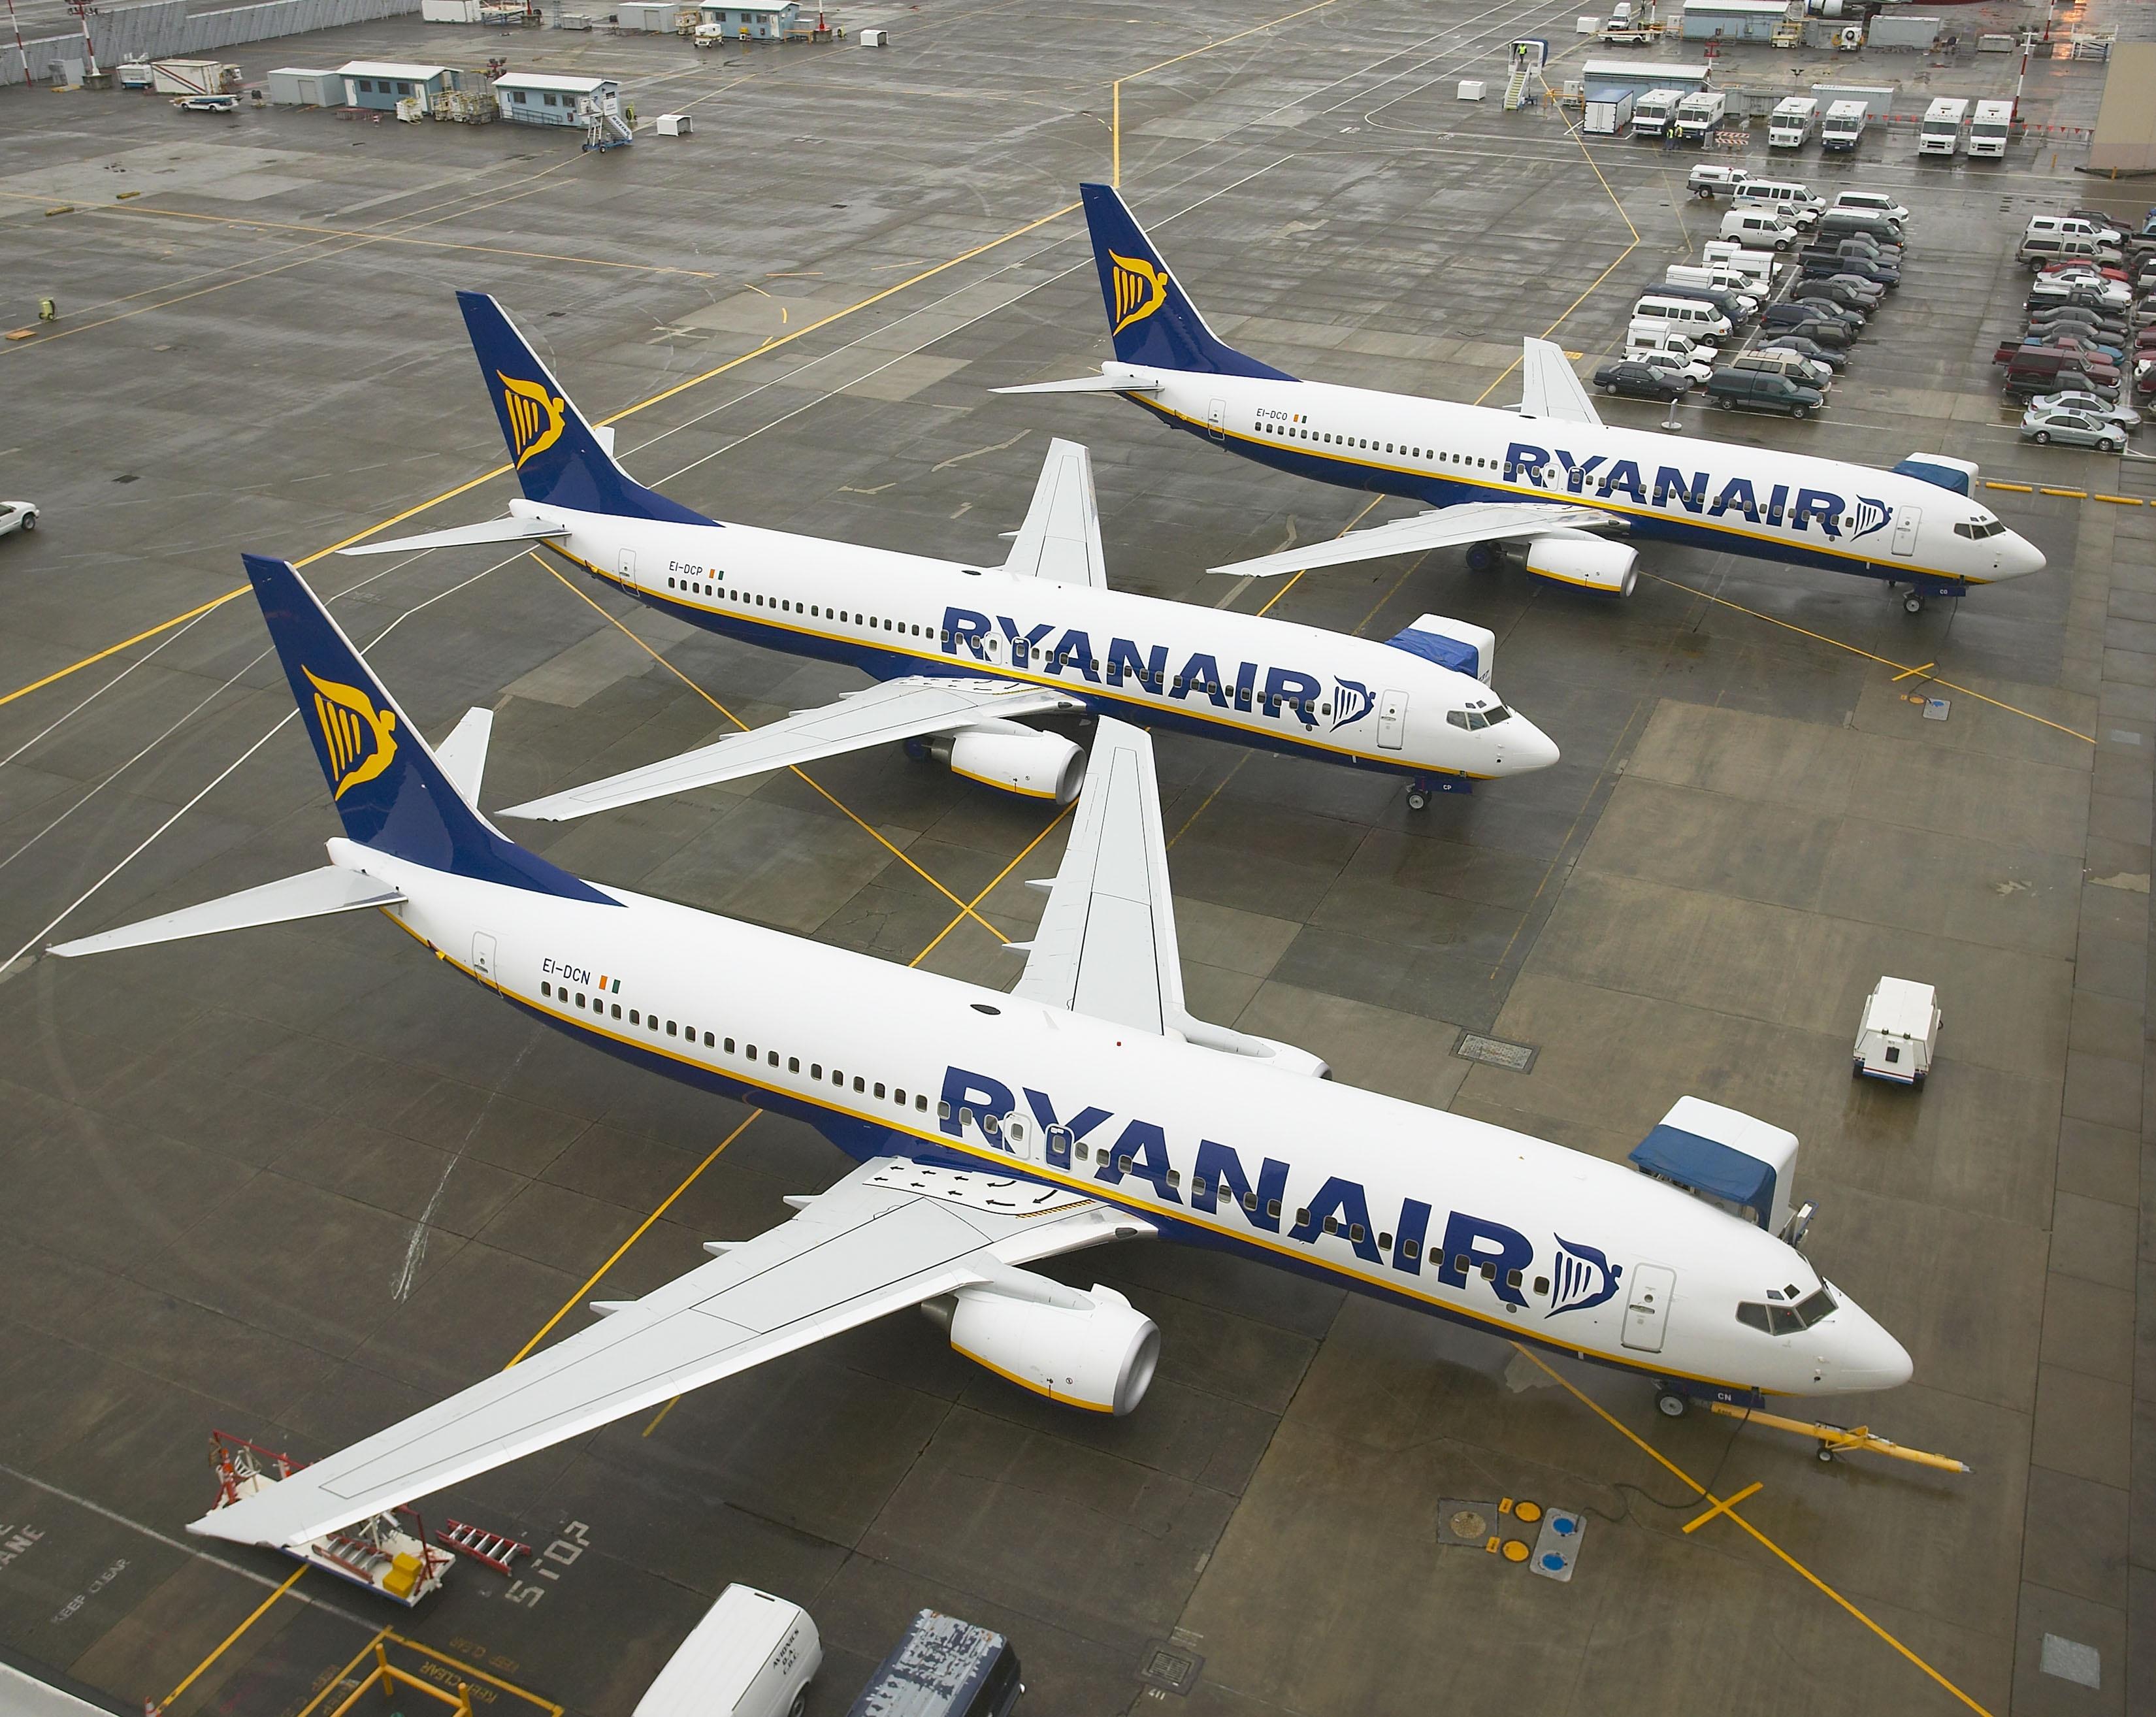 90% Of Ryanair Flights On-Time In March